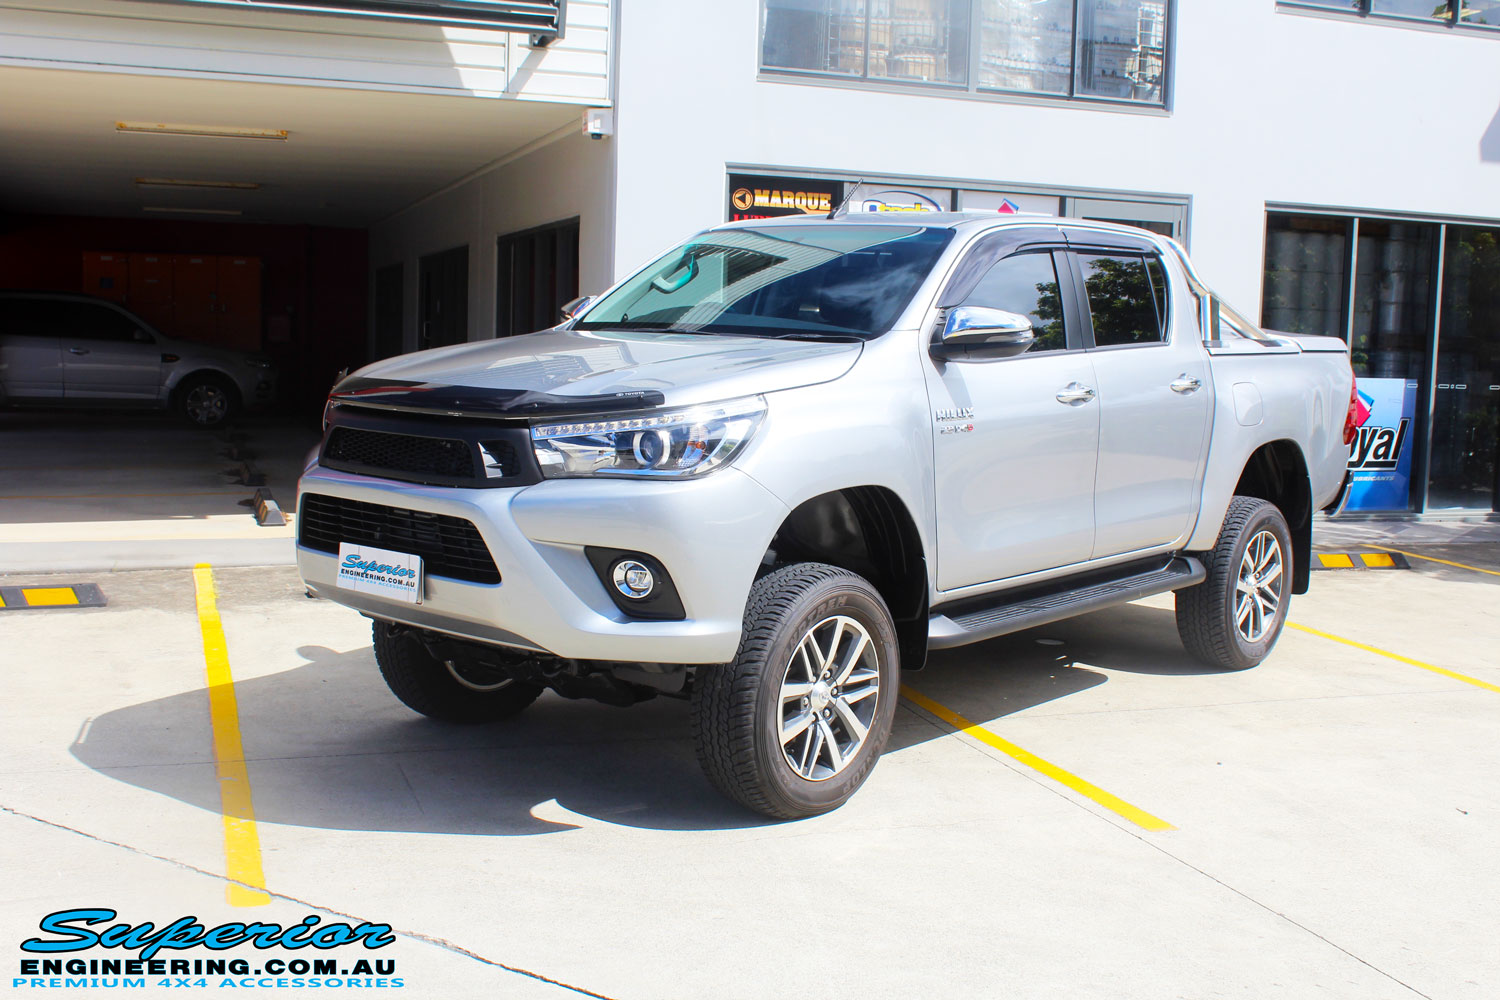 Left front side view of a Toyota Revo Hilux Dual Cab in Silver after fitment of a 3" Inch Lift Kit with King Coil Springs, Superior Billet Alloy Upper Control Arms and Body Lift Kit